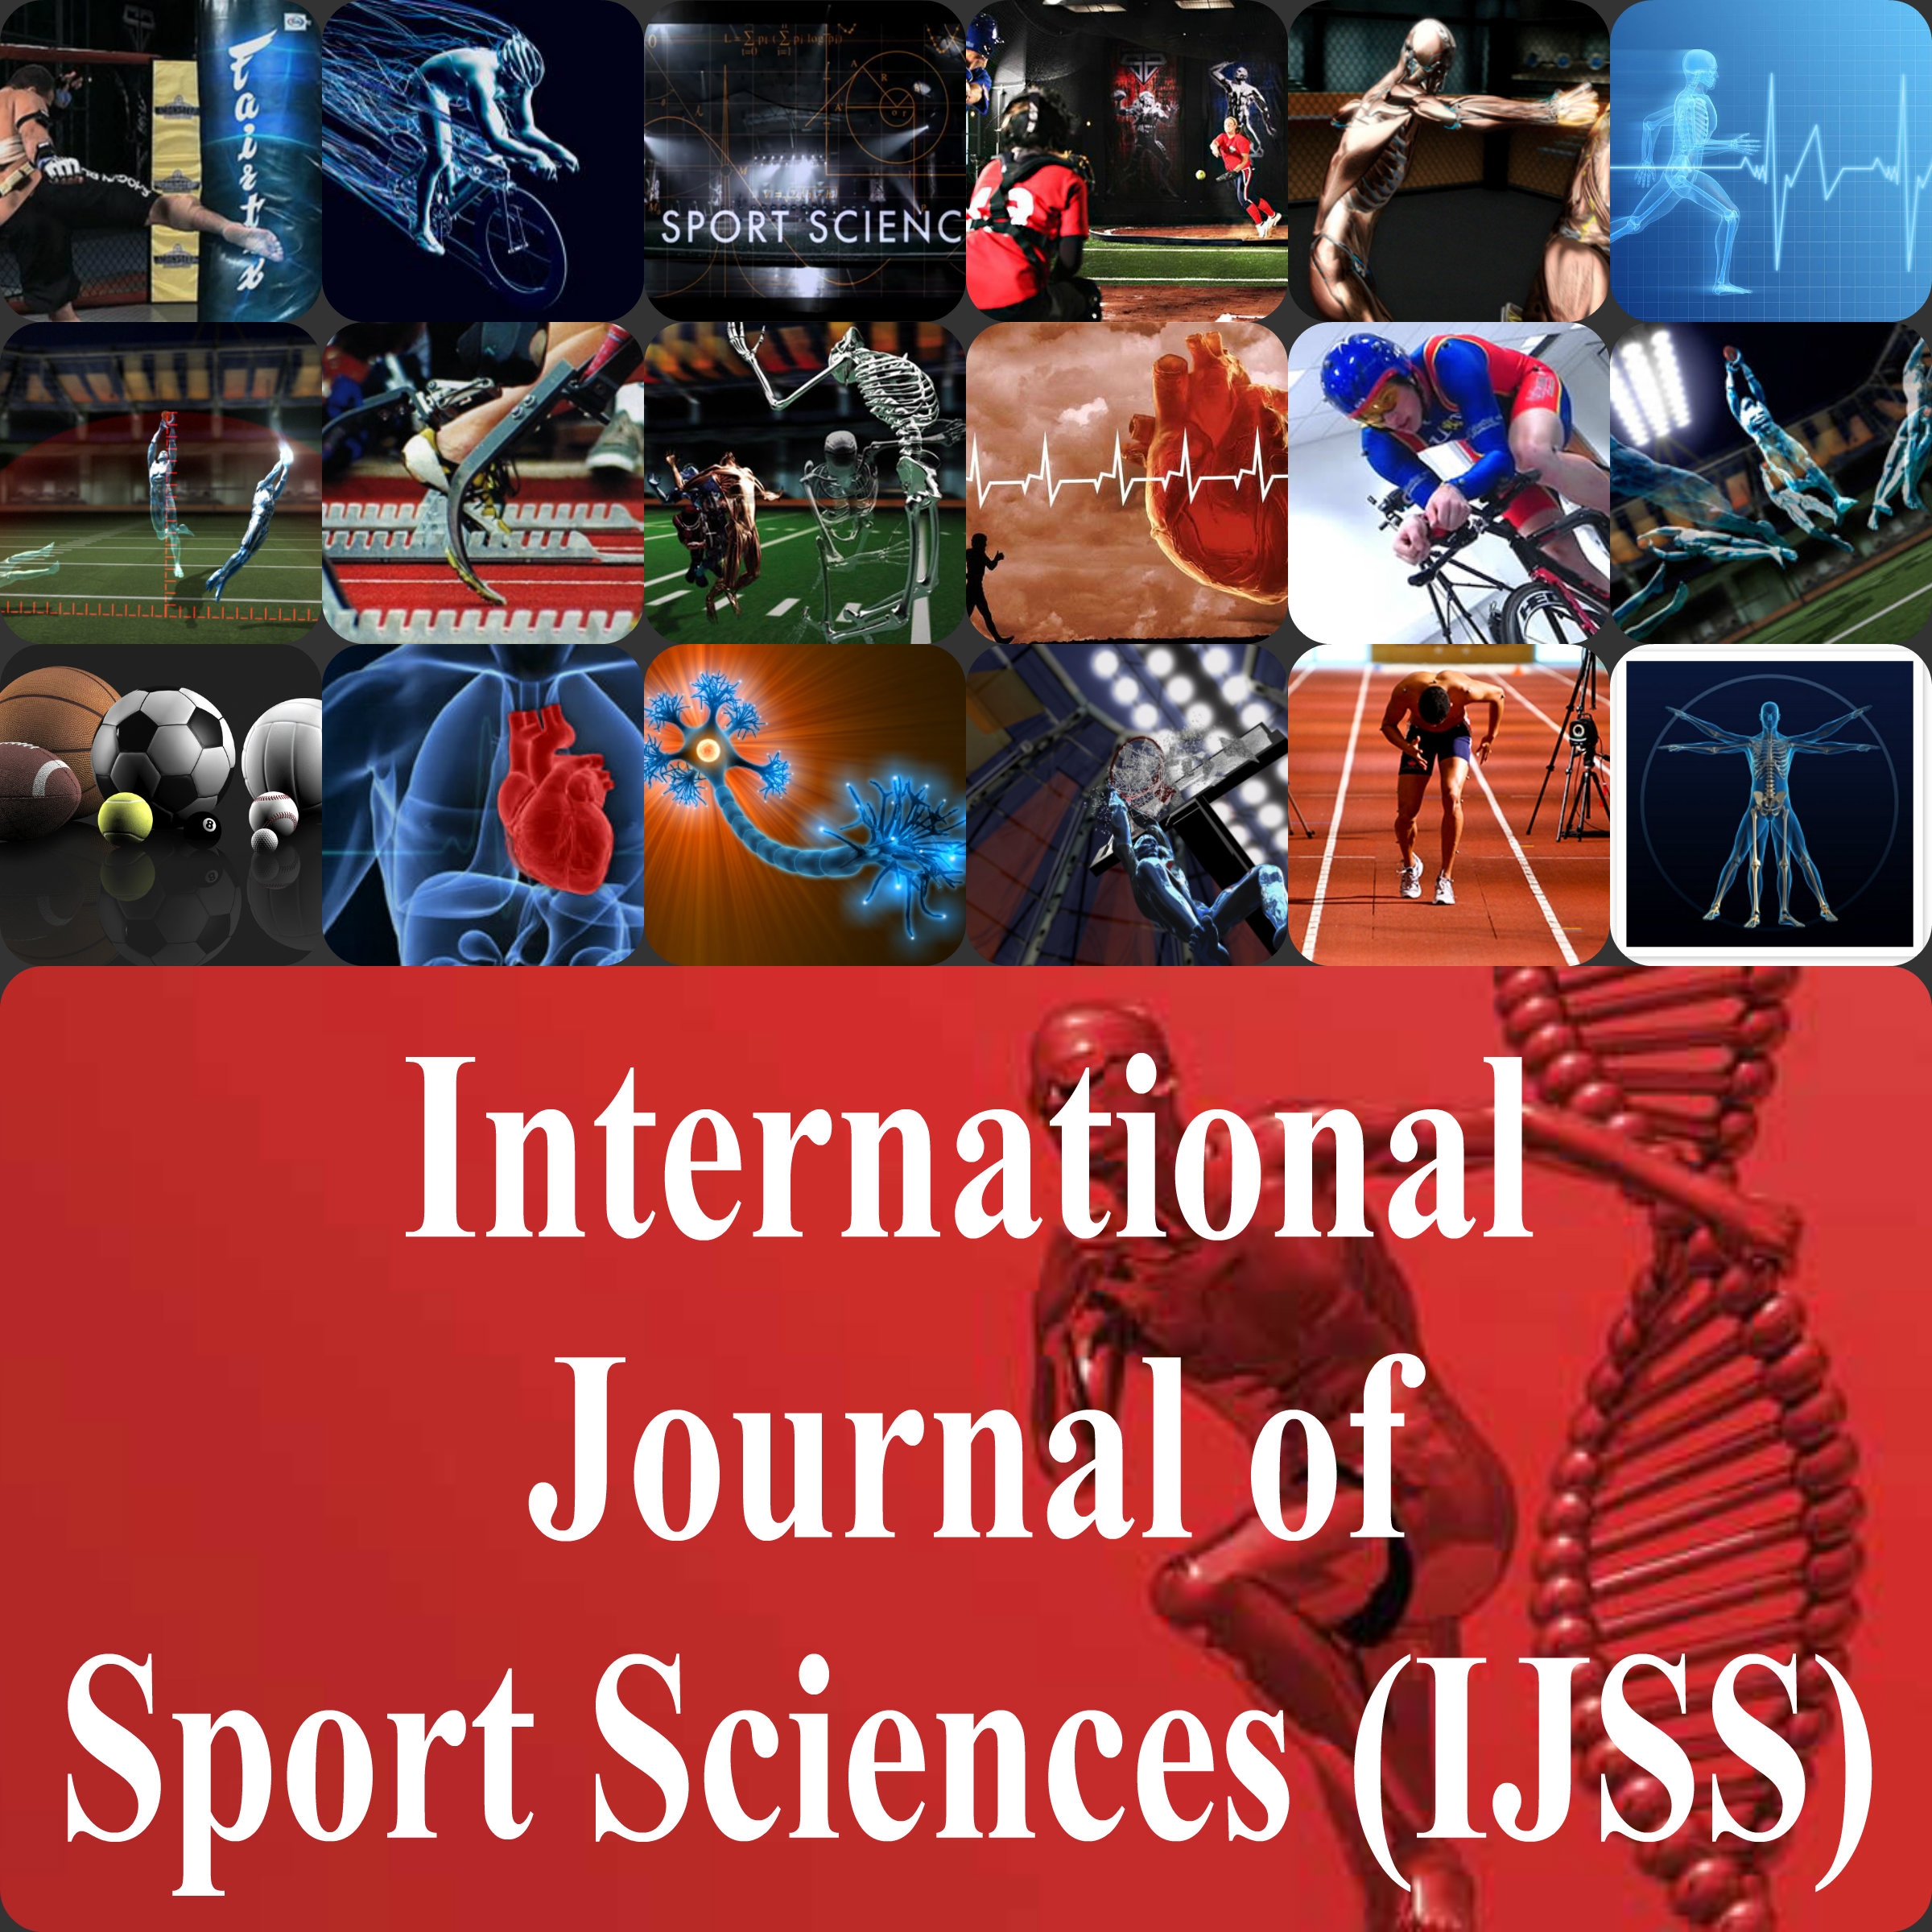 Journal Of Sports A 104